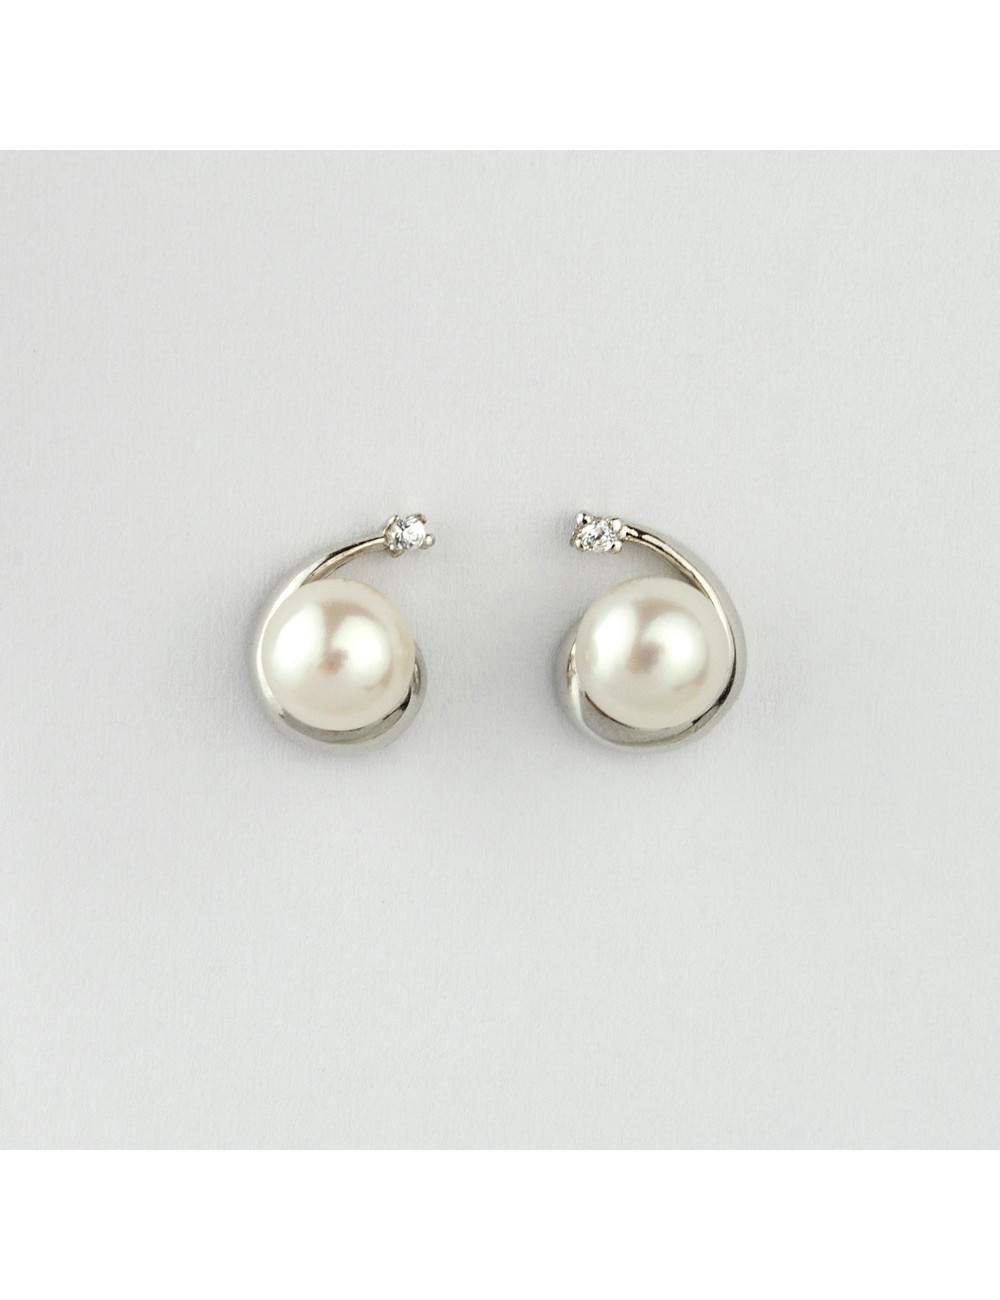 Silver earrings with white pearls and zirconia SE0002CZS